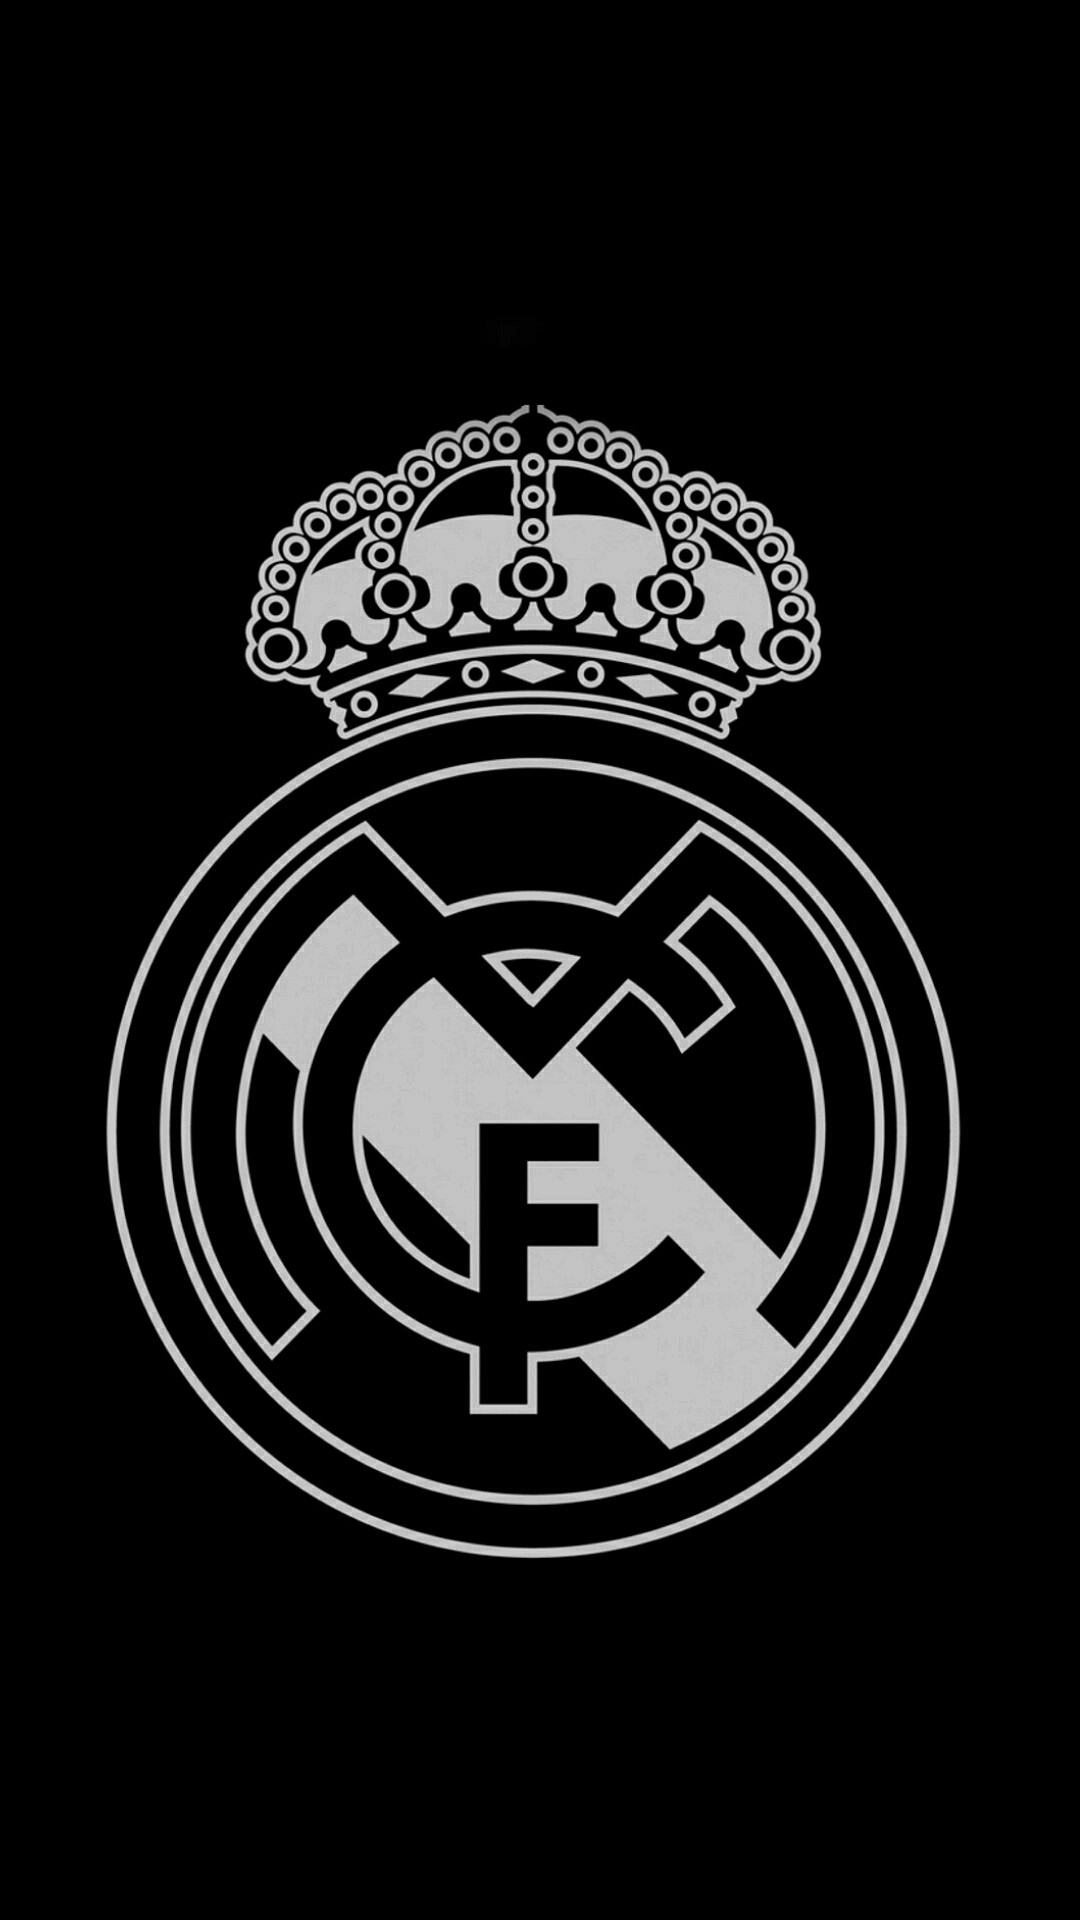 Real Madrid Logo Wallpaper HD 2018 (73+ pictures)